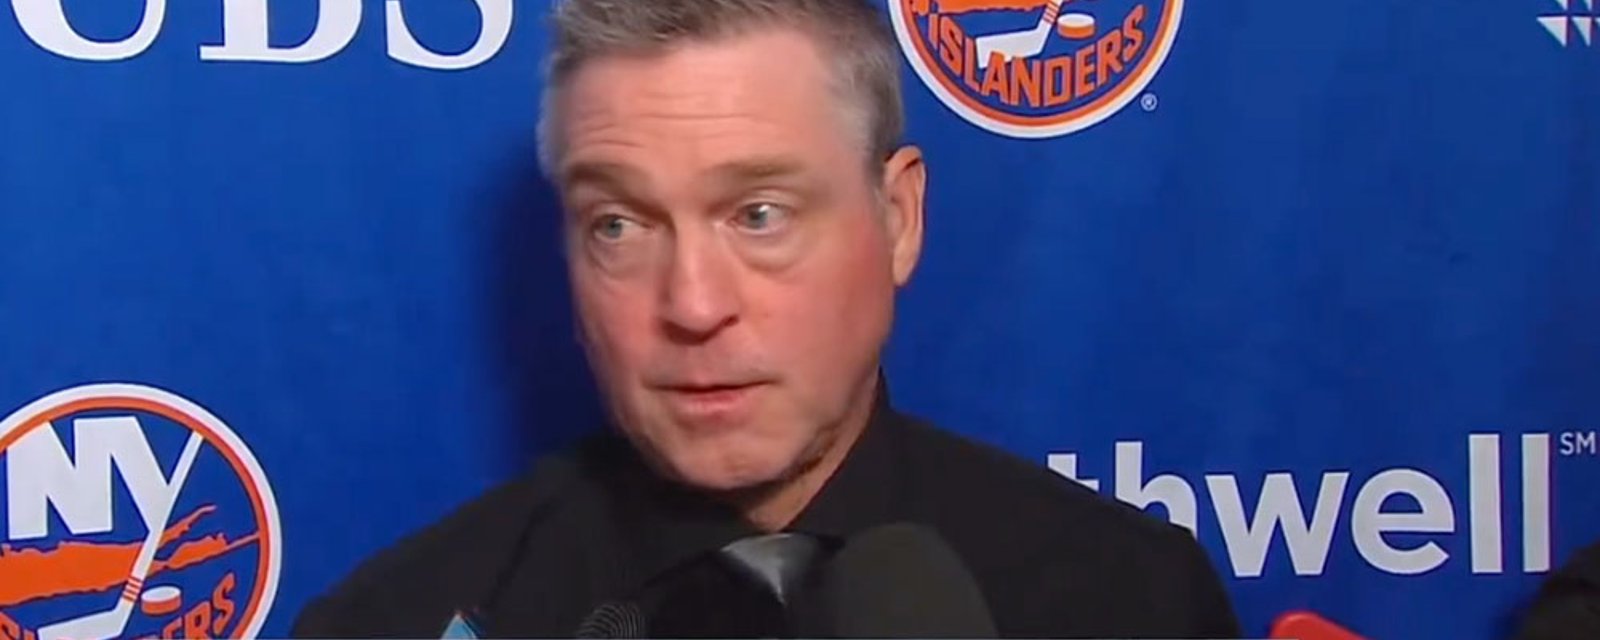 Patrick Roy with the quote of the year after beating Leafs last night